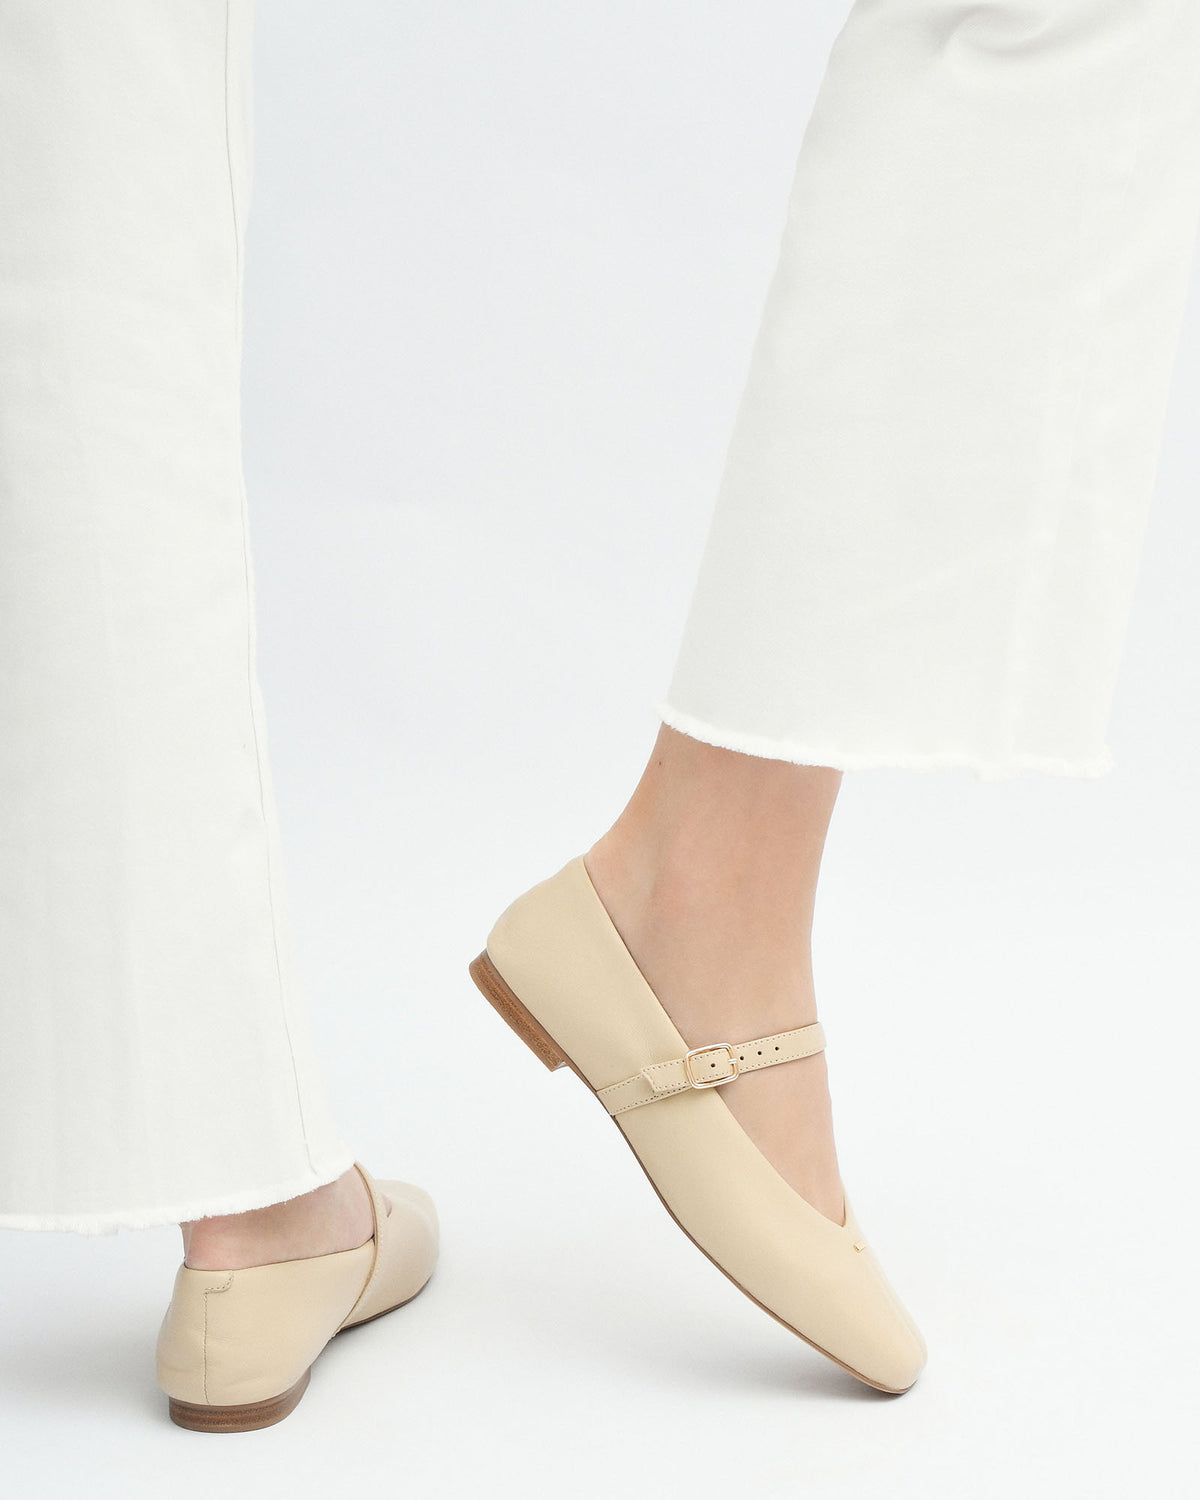 APRIL CASUAL FLATS SAND LEATHER